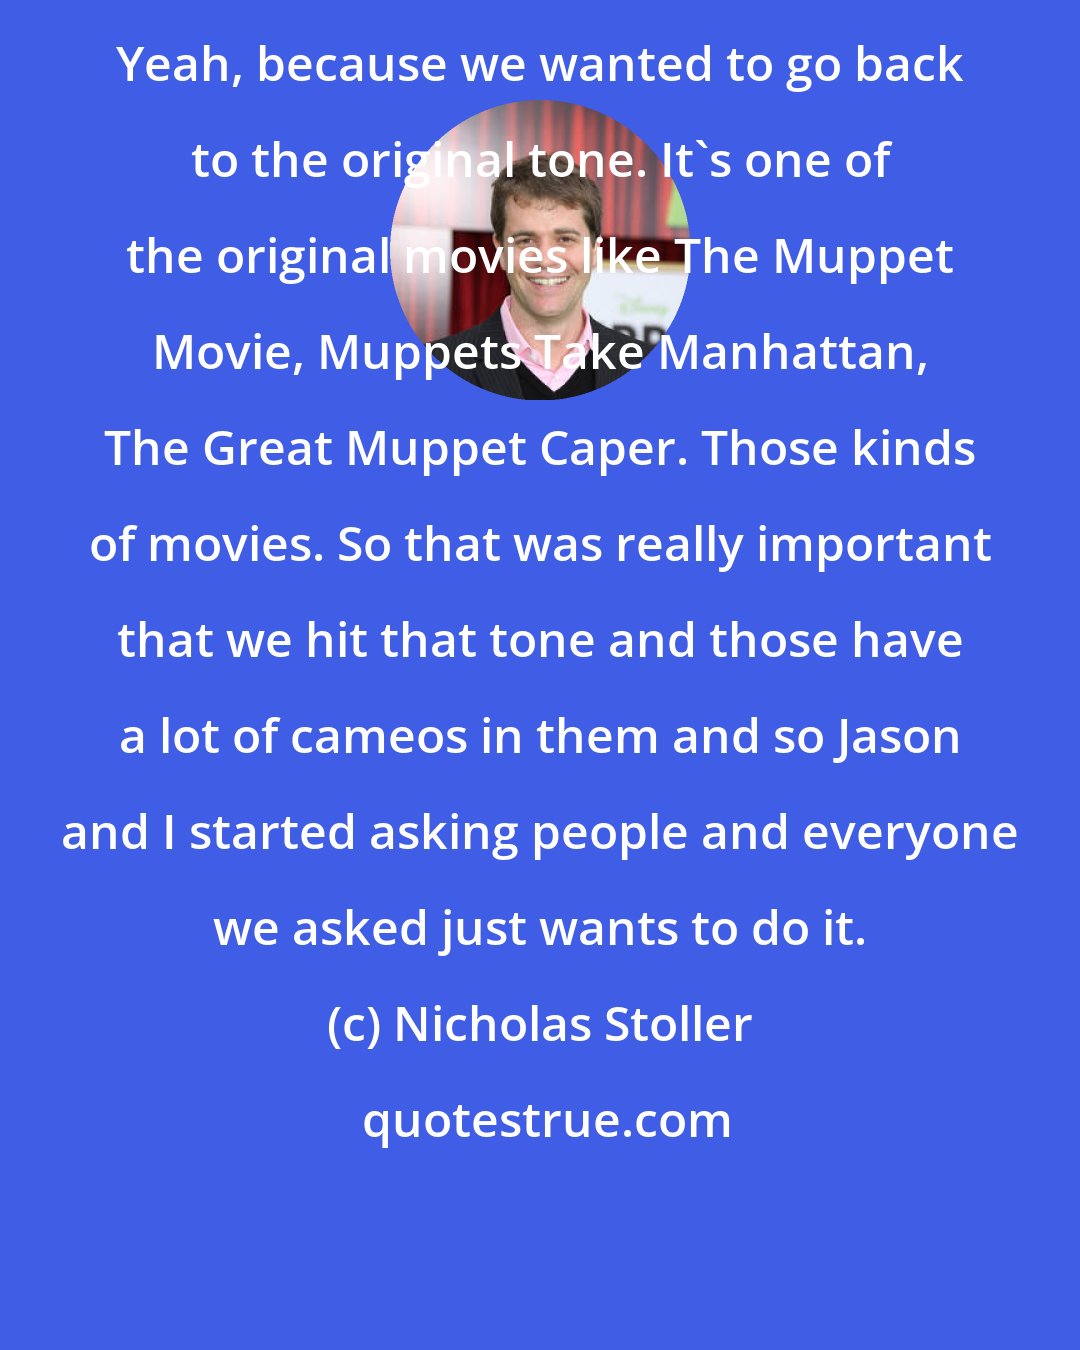 Nicholas Stoller: Yeah, because we wanted to go back to the original tone. It's one of the original movies like The Muppet Movie, Muppets Take Manhattan, The Great Muppet Caper. Those kinds of movies. So that was really important that we hit that tone and those have a lot of cameos in them and so Jason and I started asking people and everyone we asked just wants to do it.